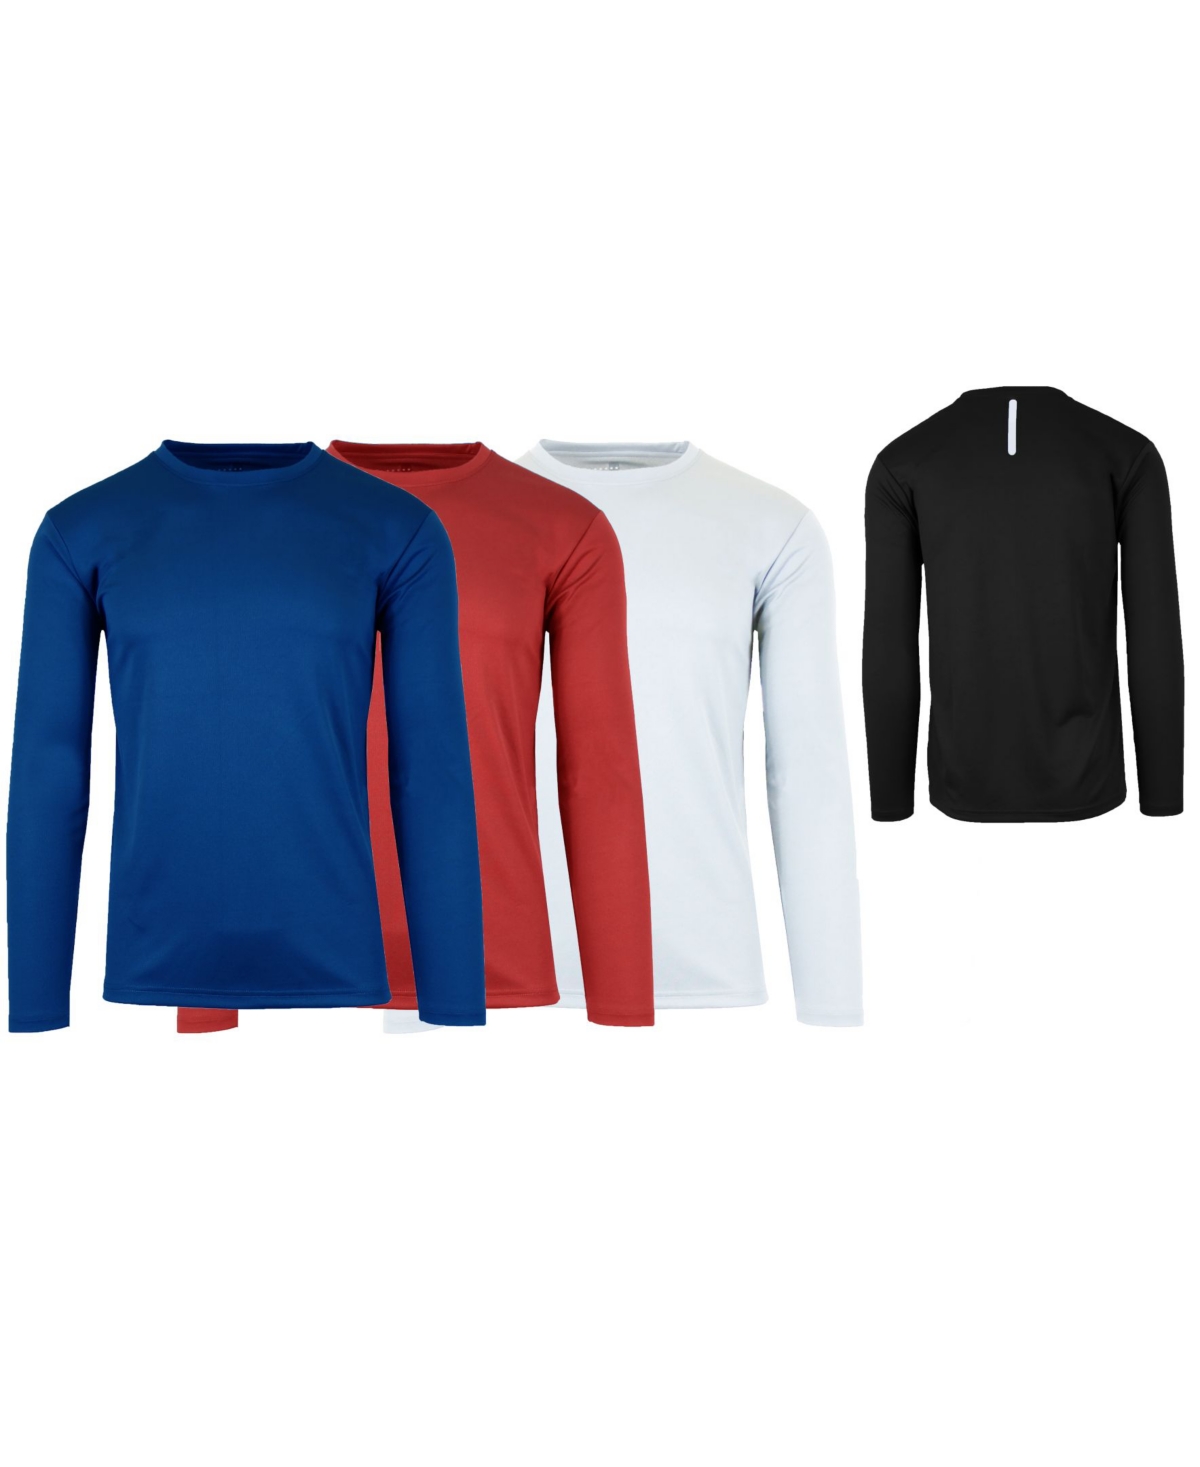 Shop Galaxy By Harvic Men's Long Sleeve Moisture-wicking Performance Tee, Pack Of 3 In Navy,red,white